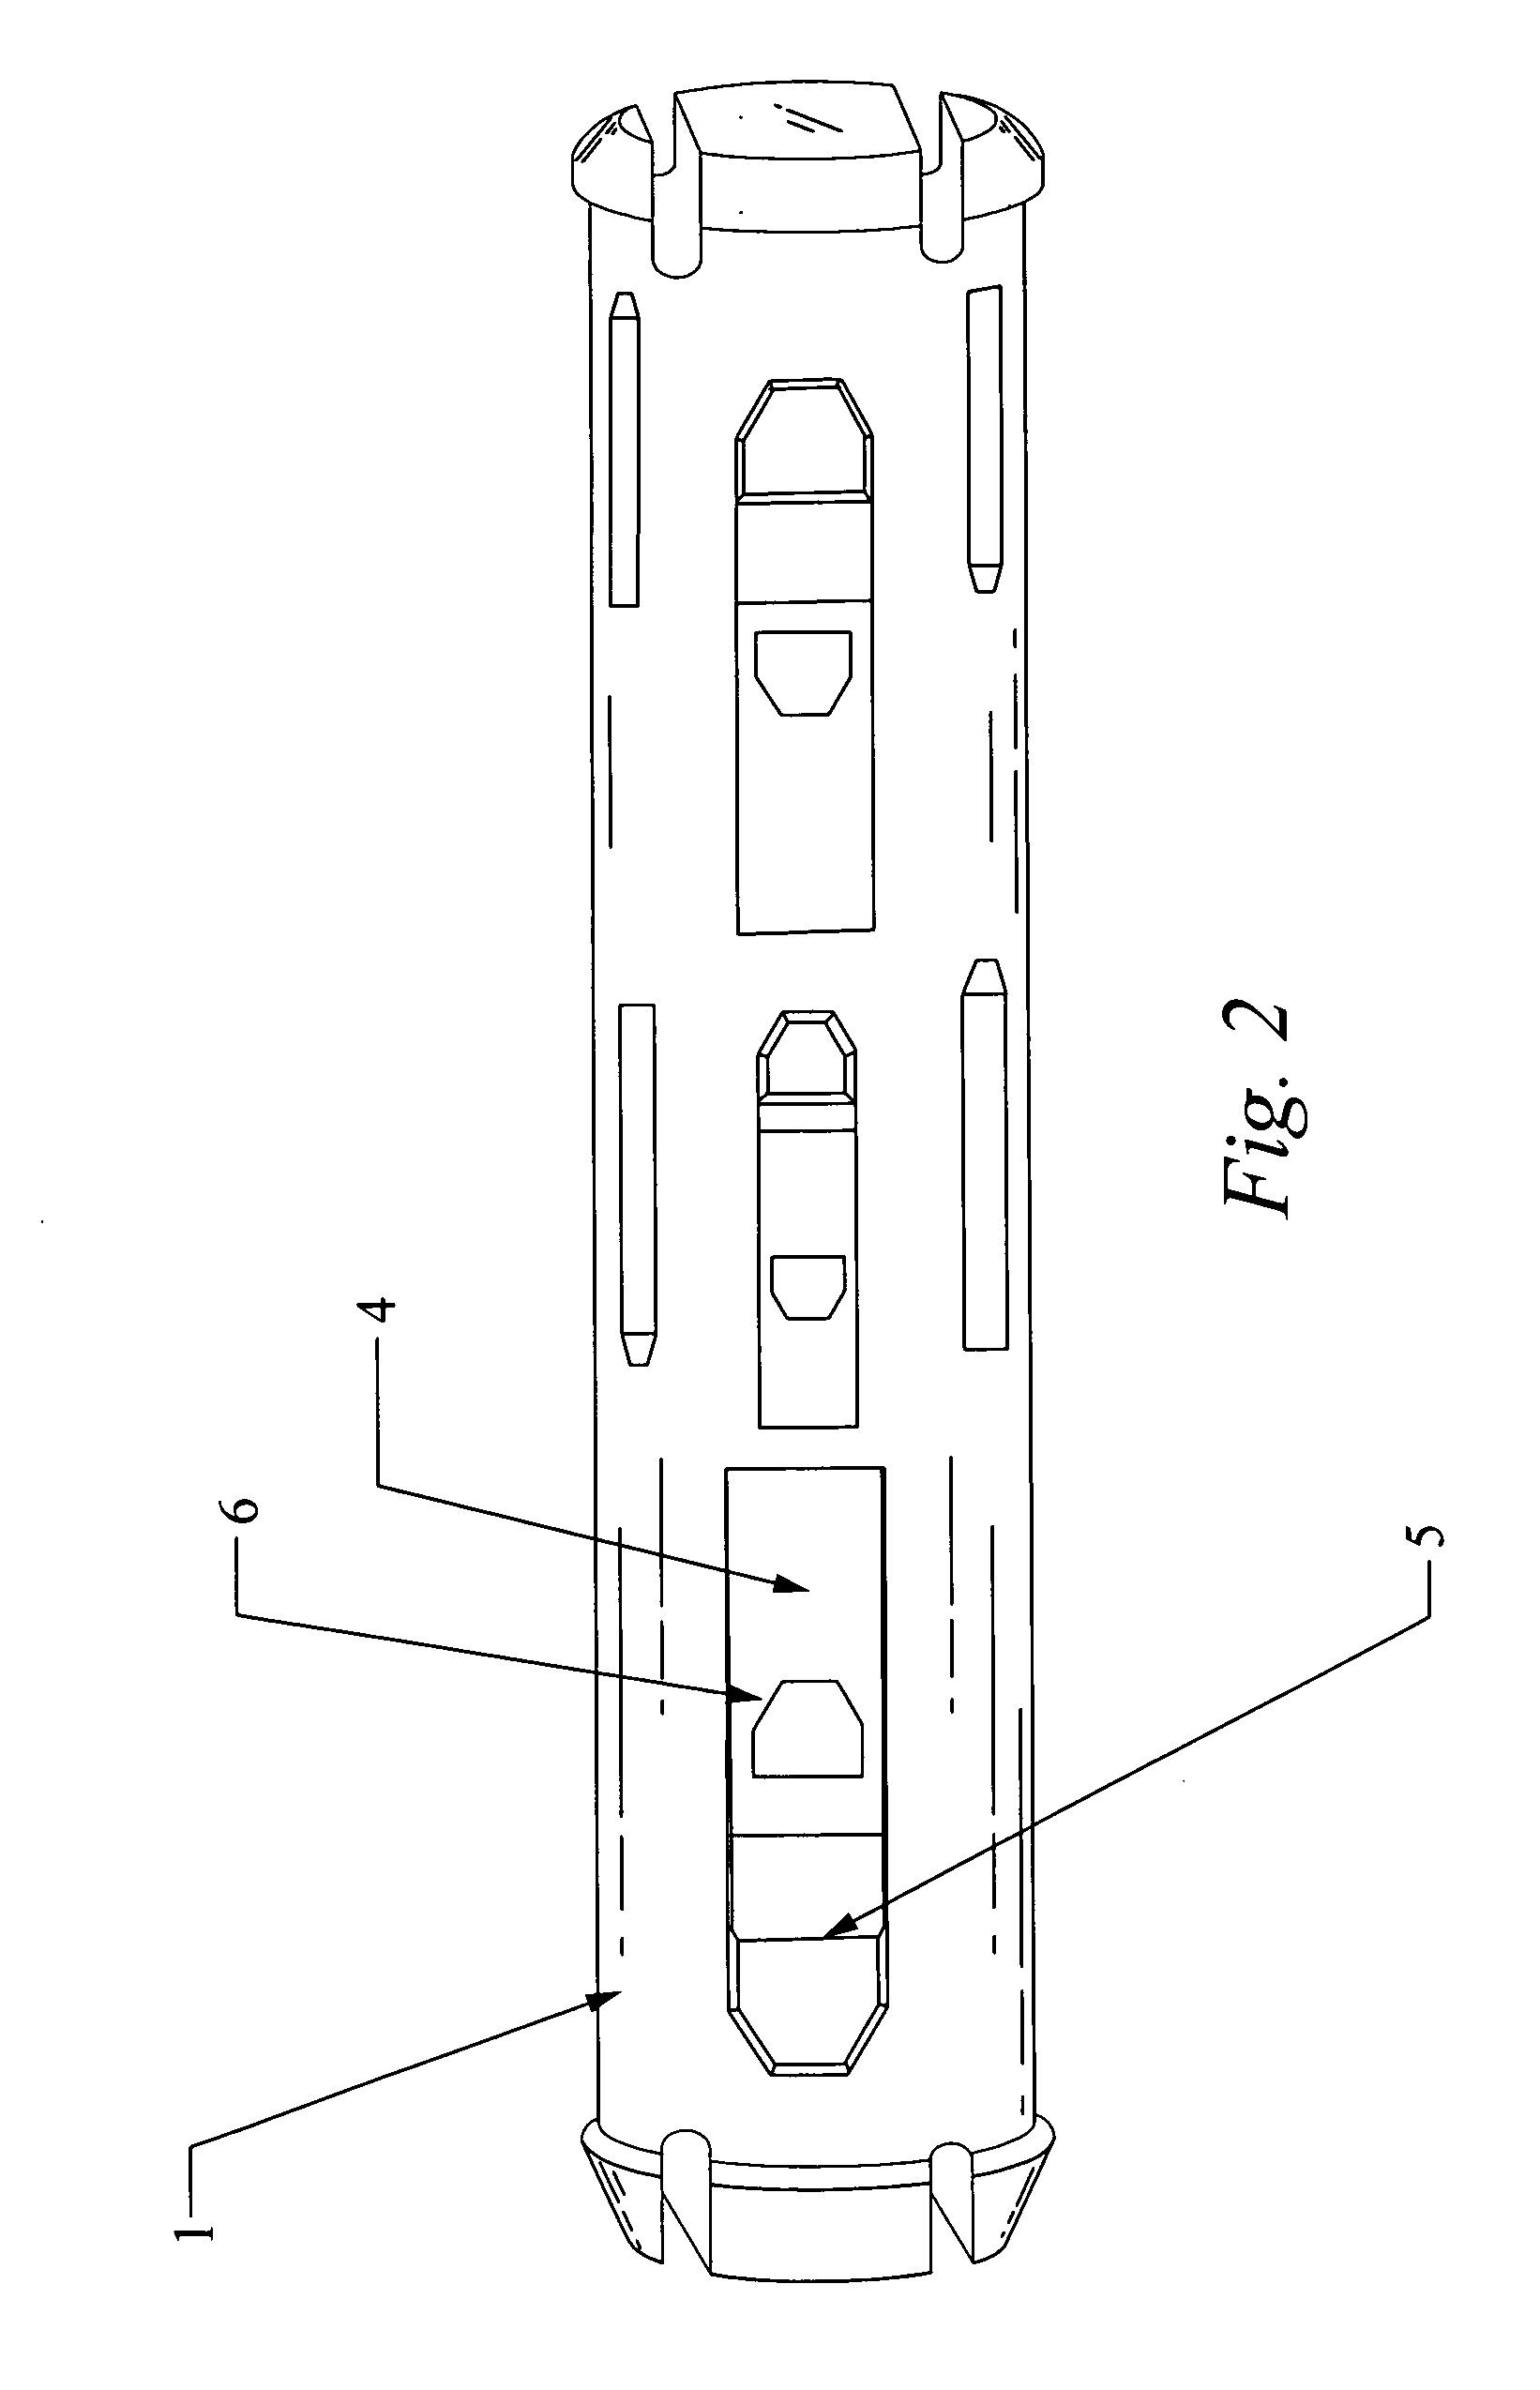 Tool handle for holding multiple tools of different sizes during use